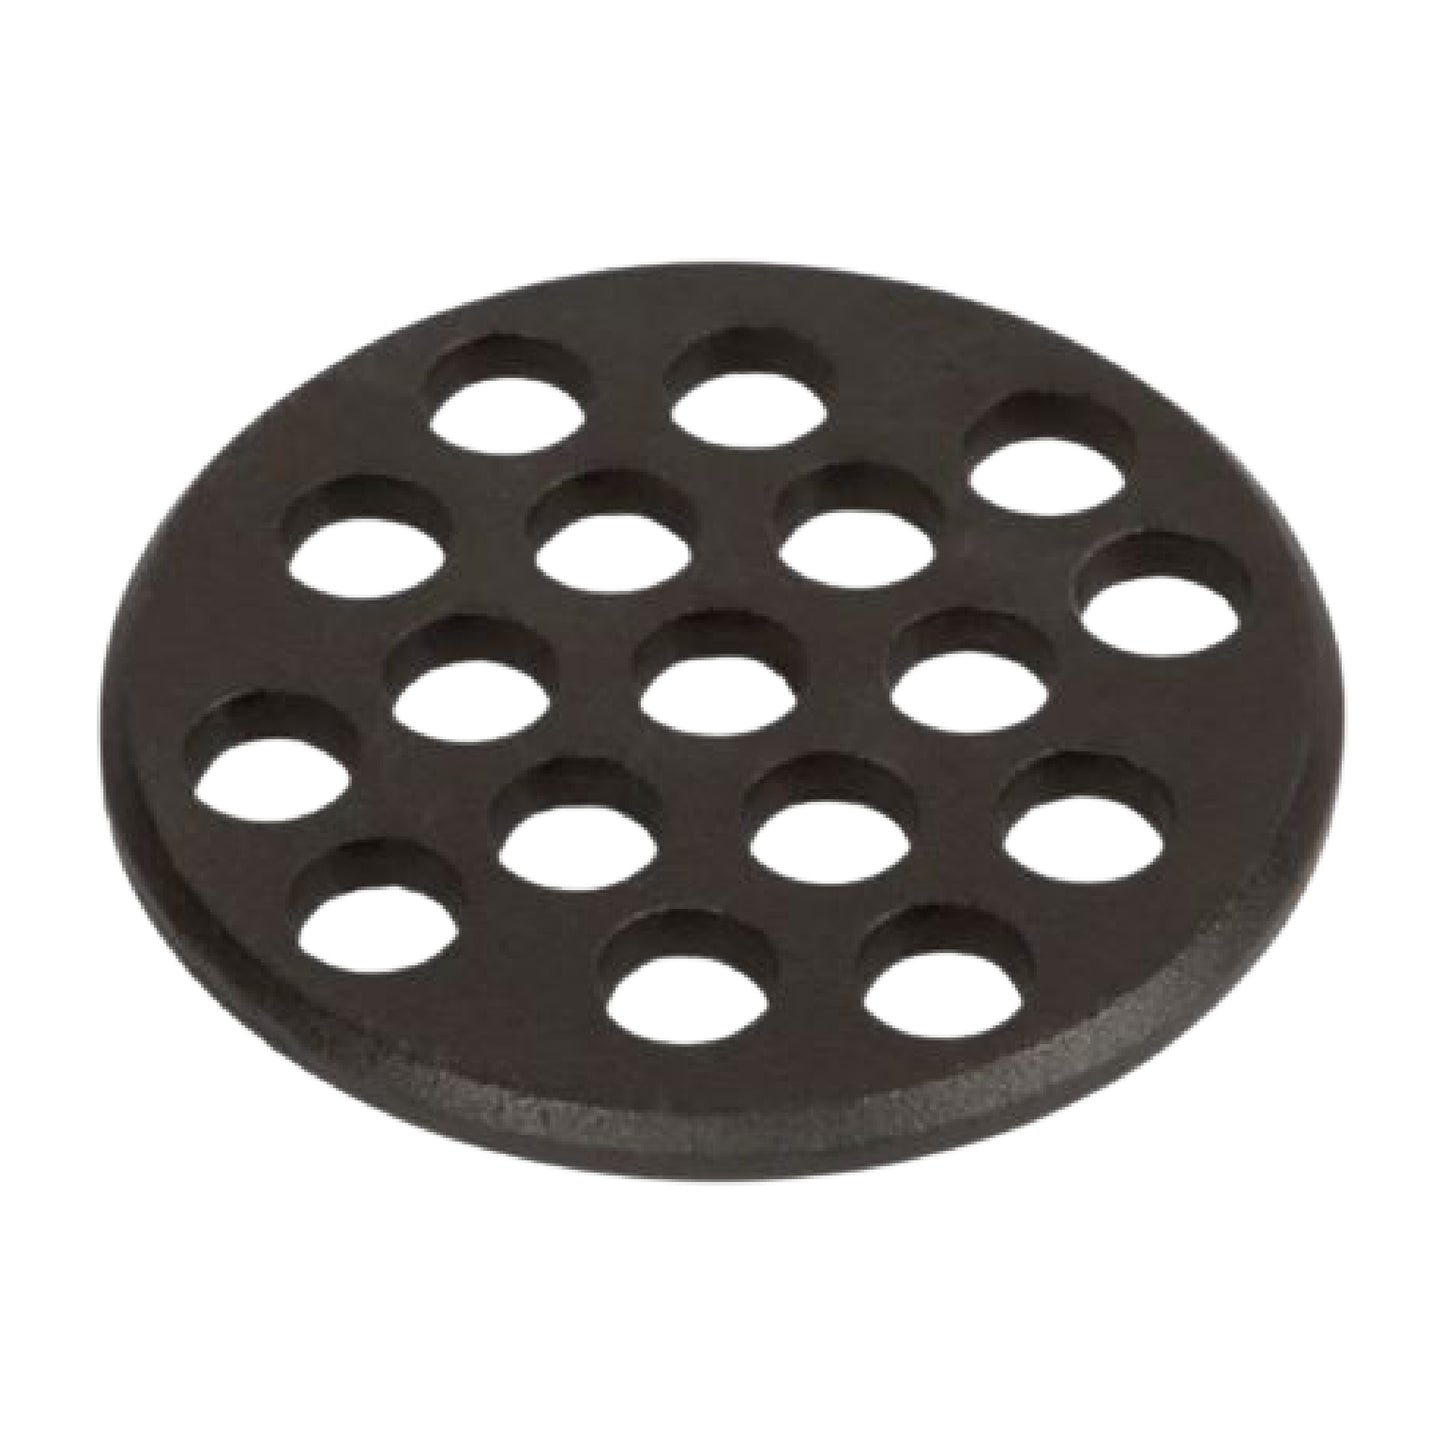 Big Green Egg Fire Grate in Cast Iron for Large/MiniMax Egg